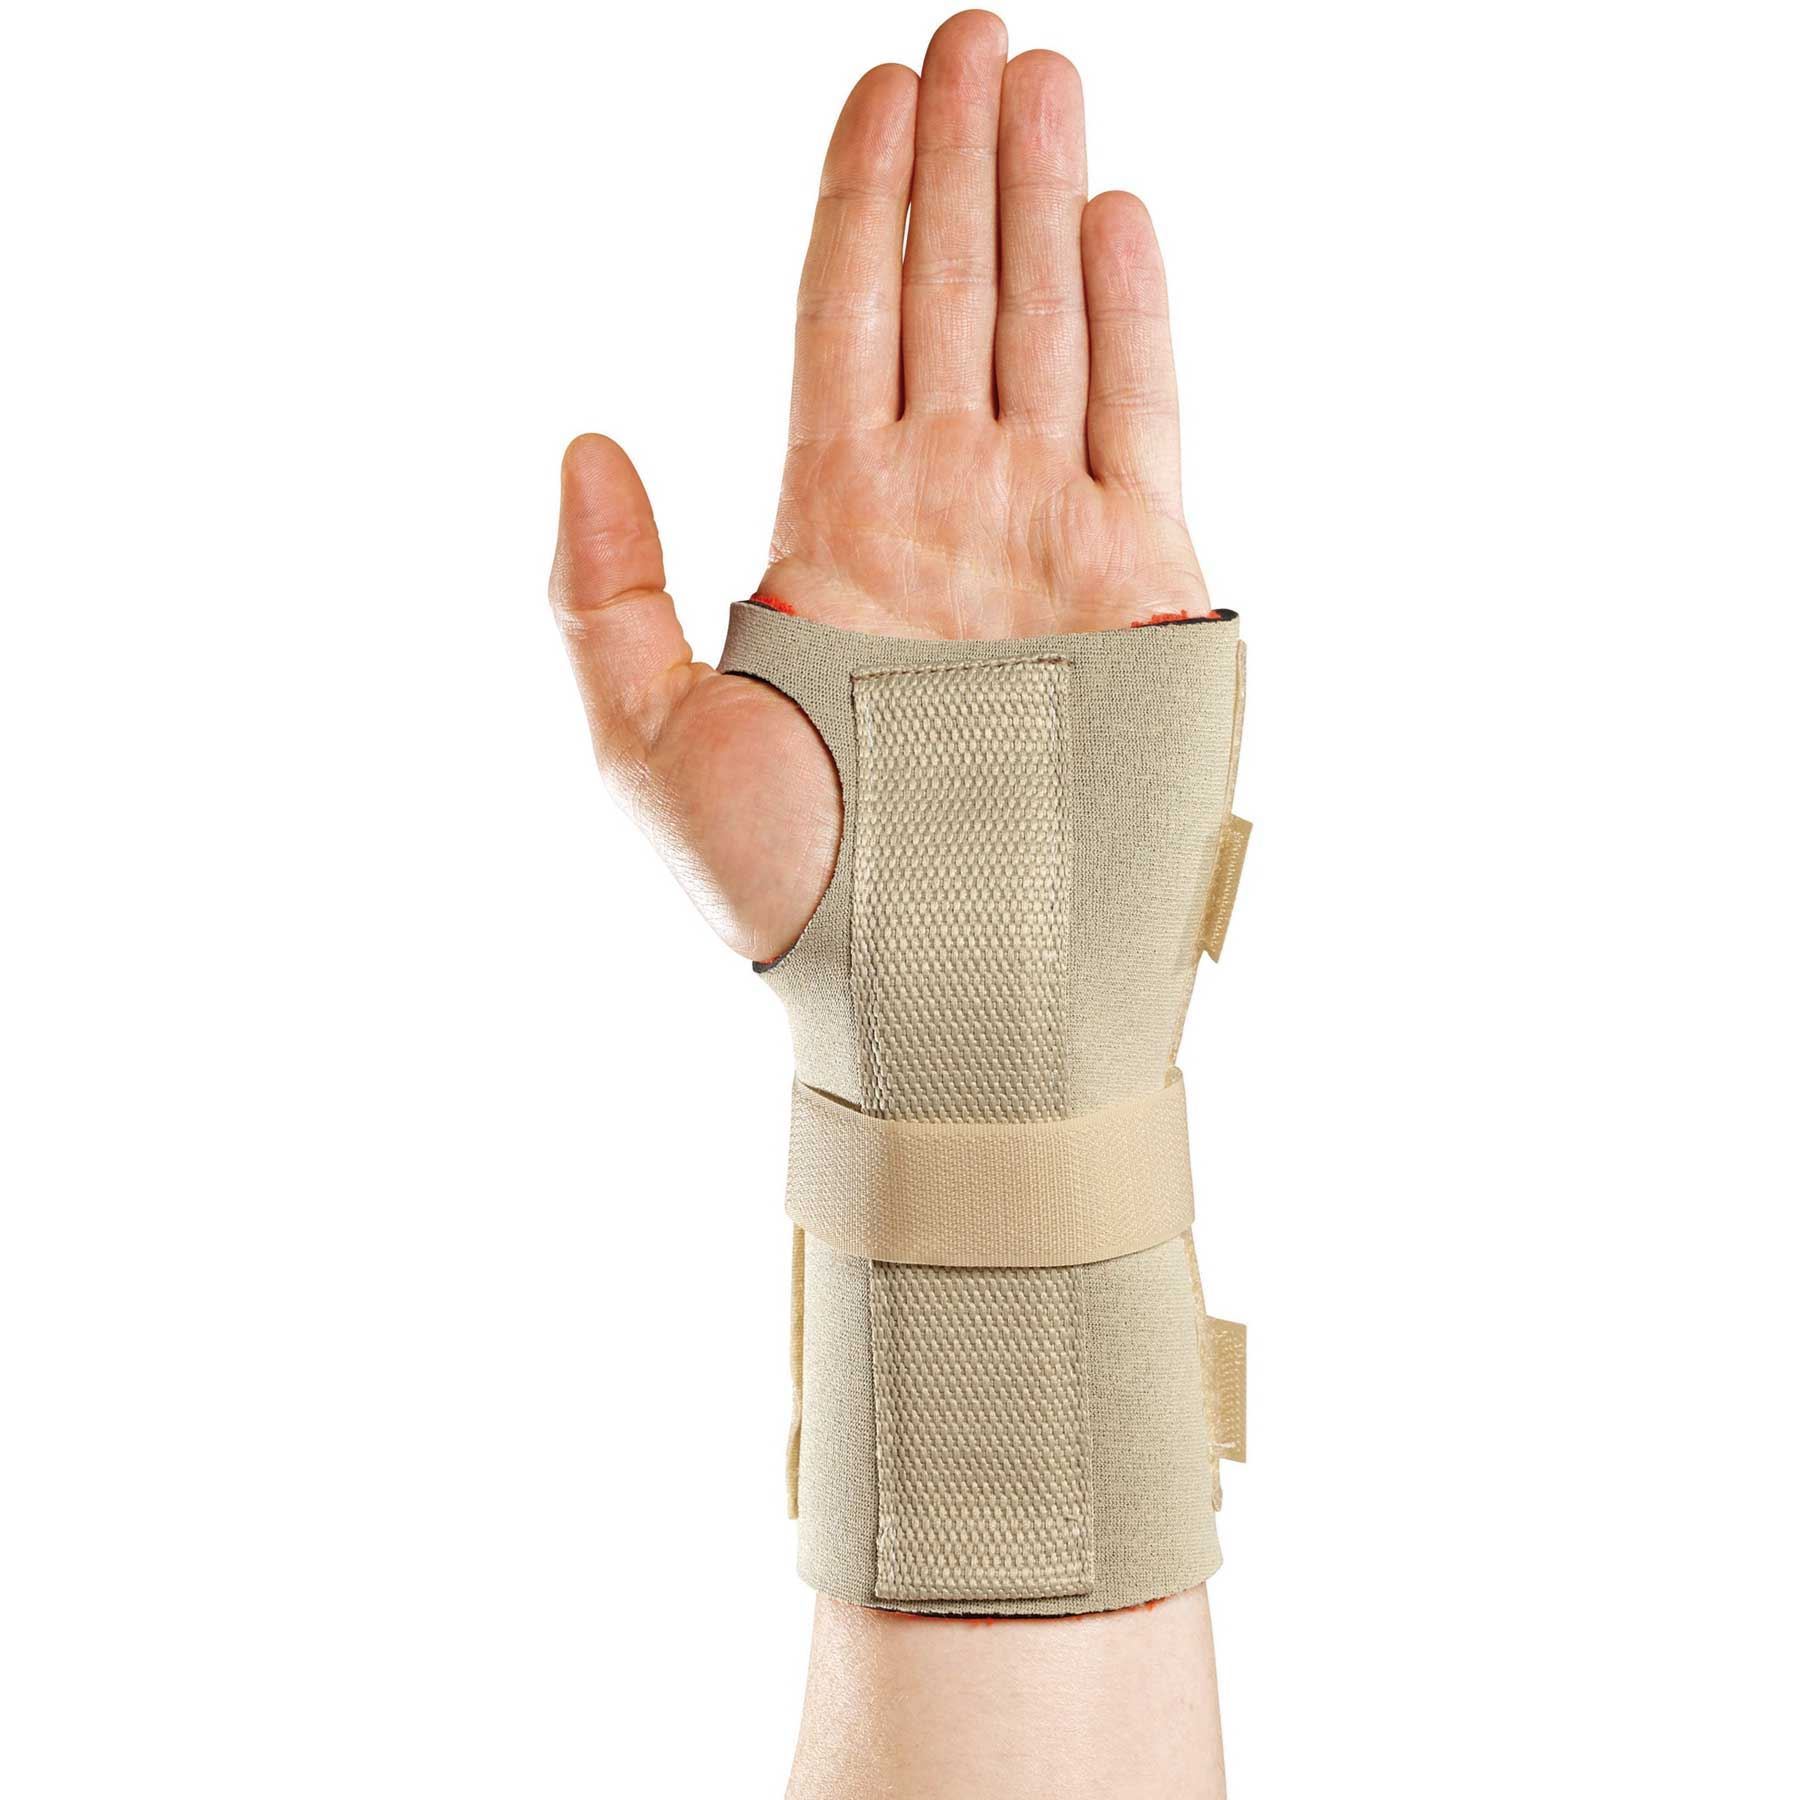 Thermoskin Thermal Wrist Hand Brace Opc Health